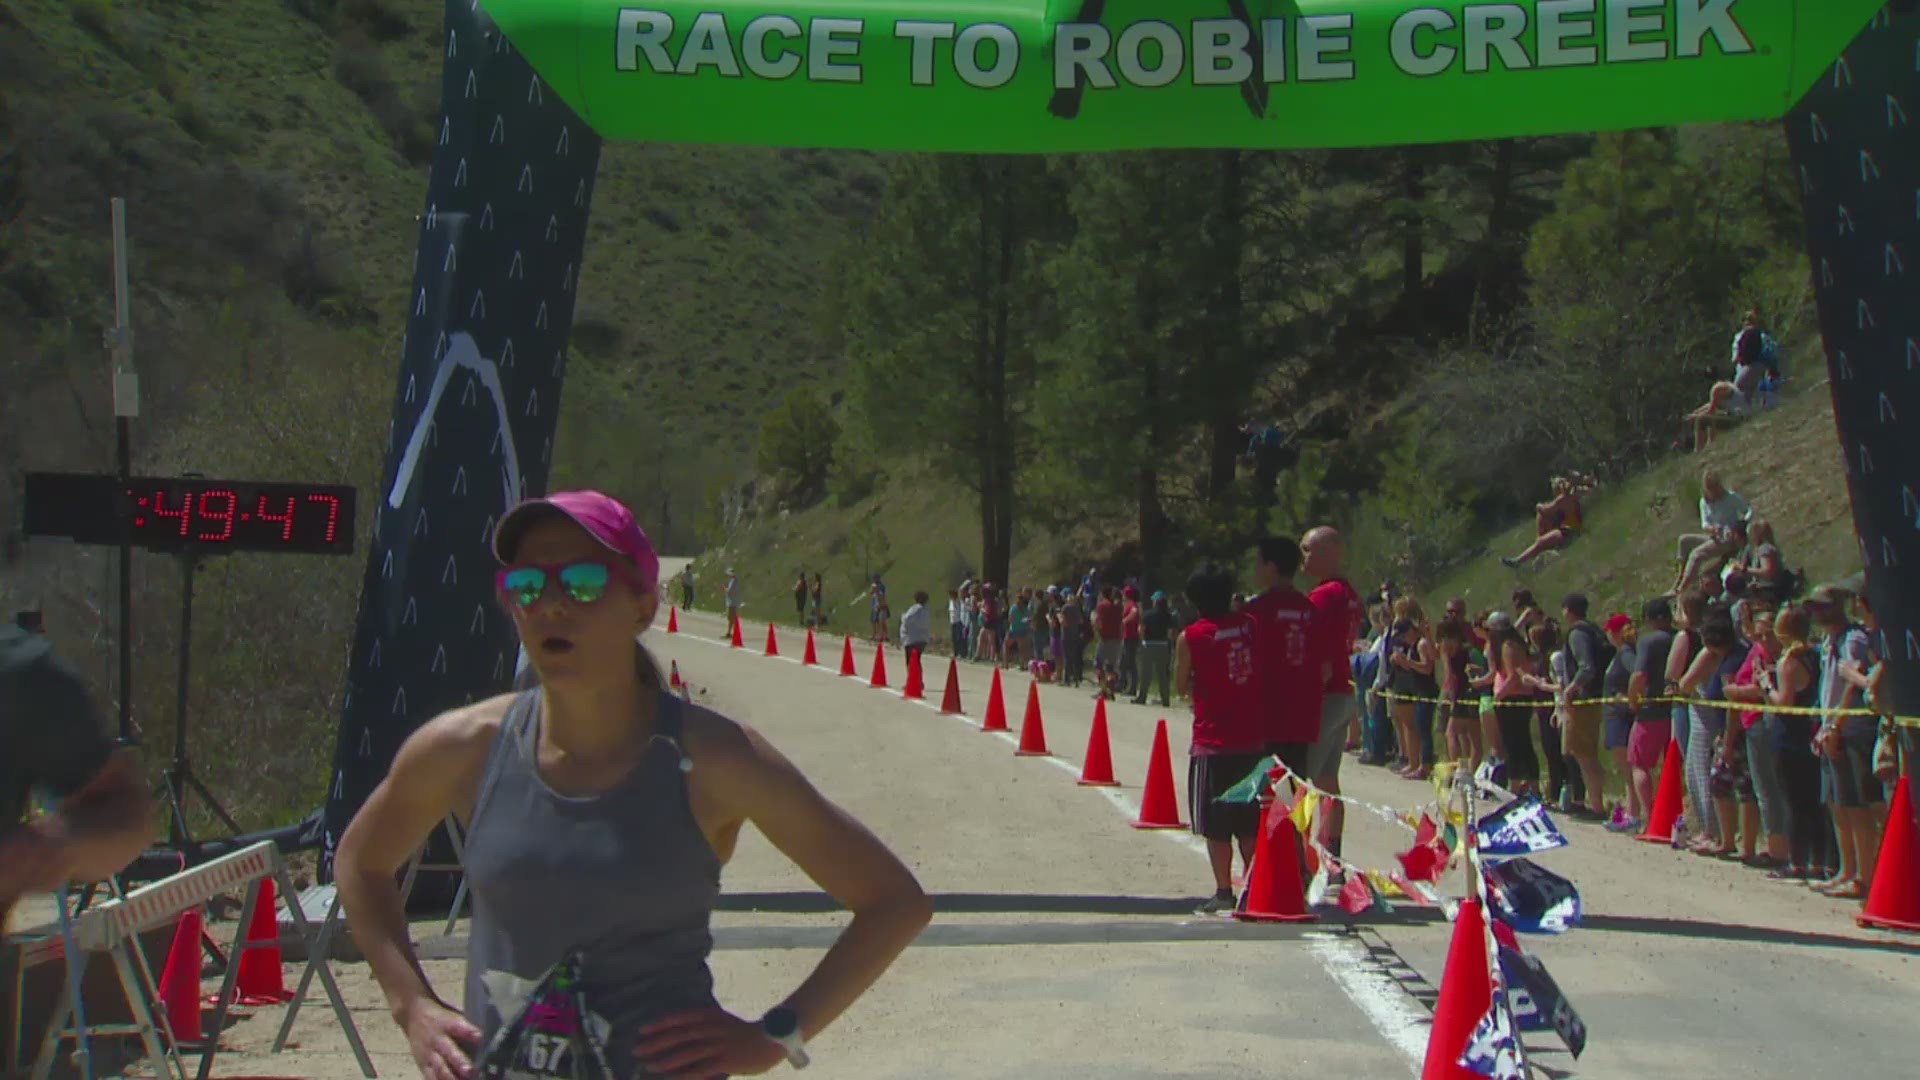 Fourth group of finishers in 41st annual Race To Robie Creek